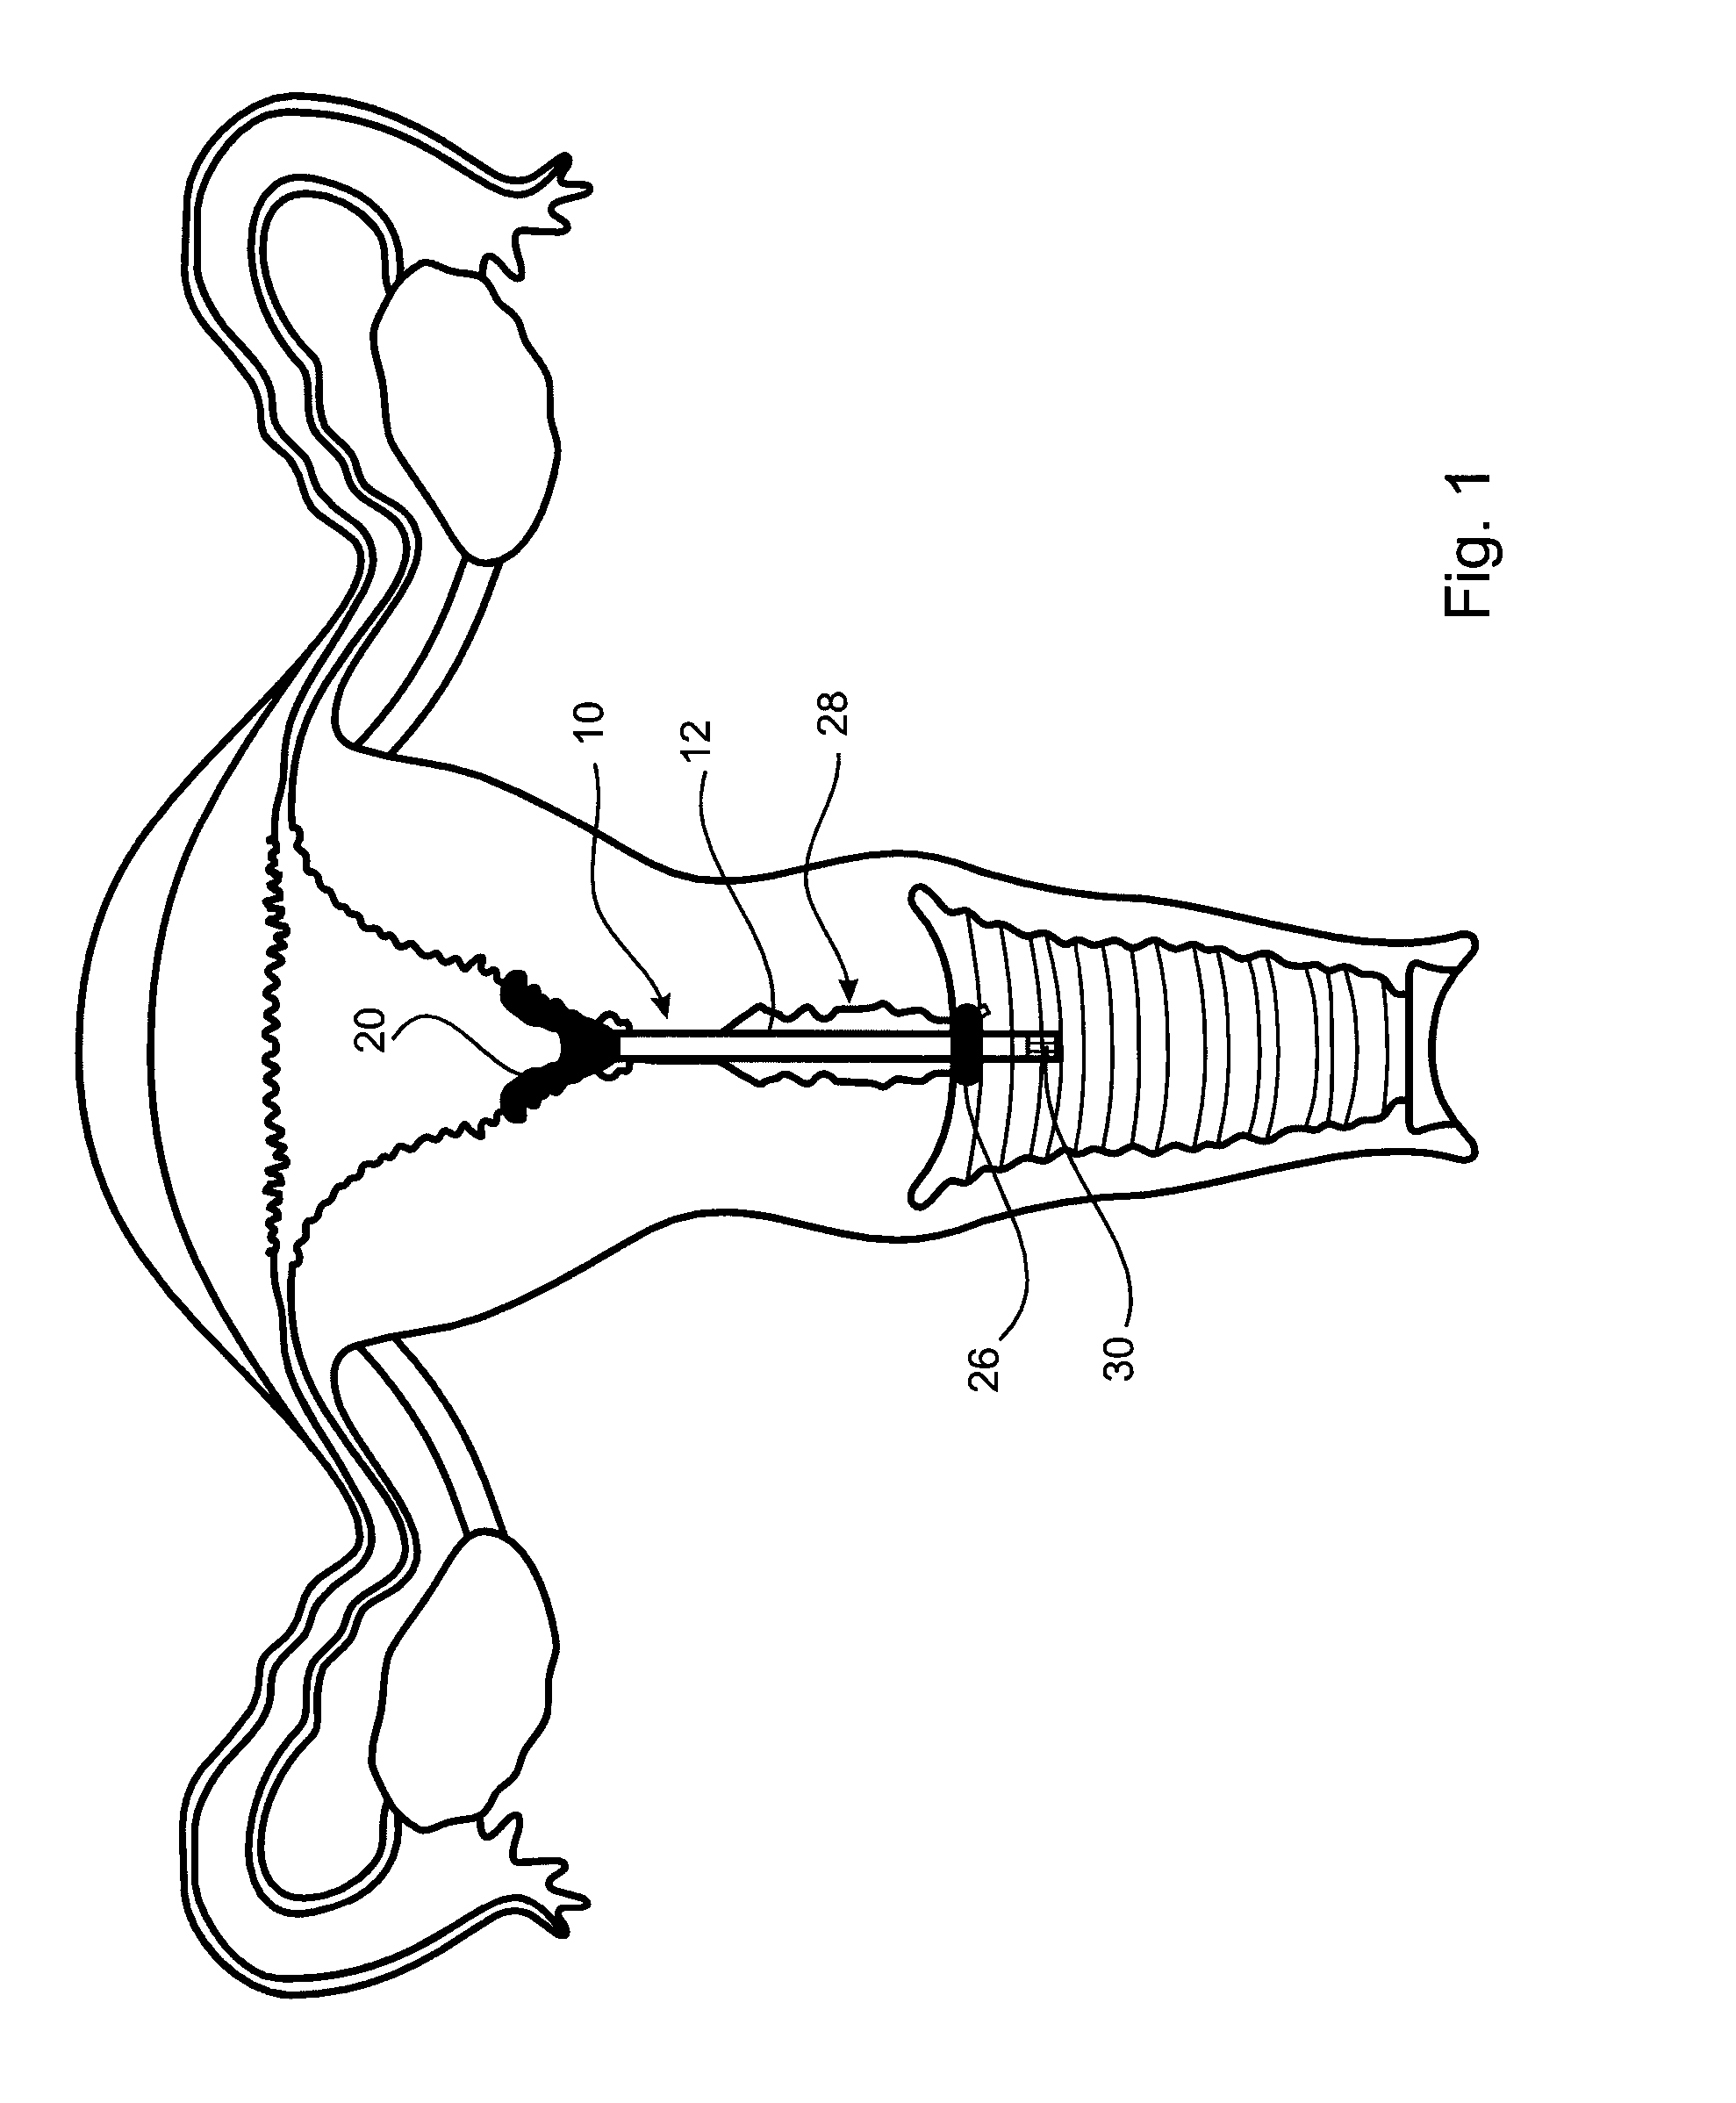 Therapeutic substance transfer catheter and method